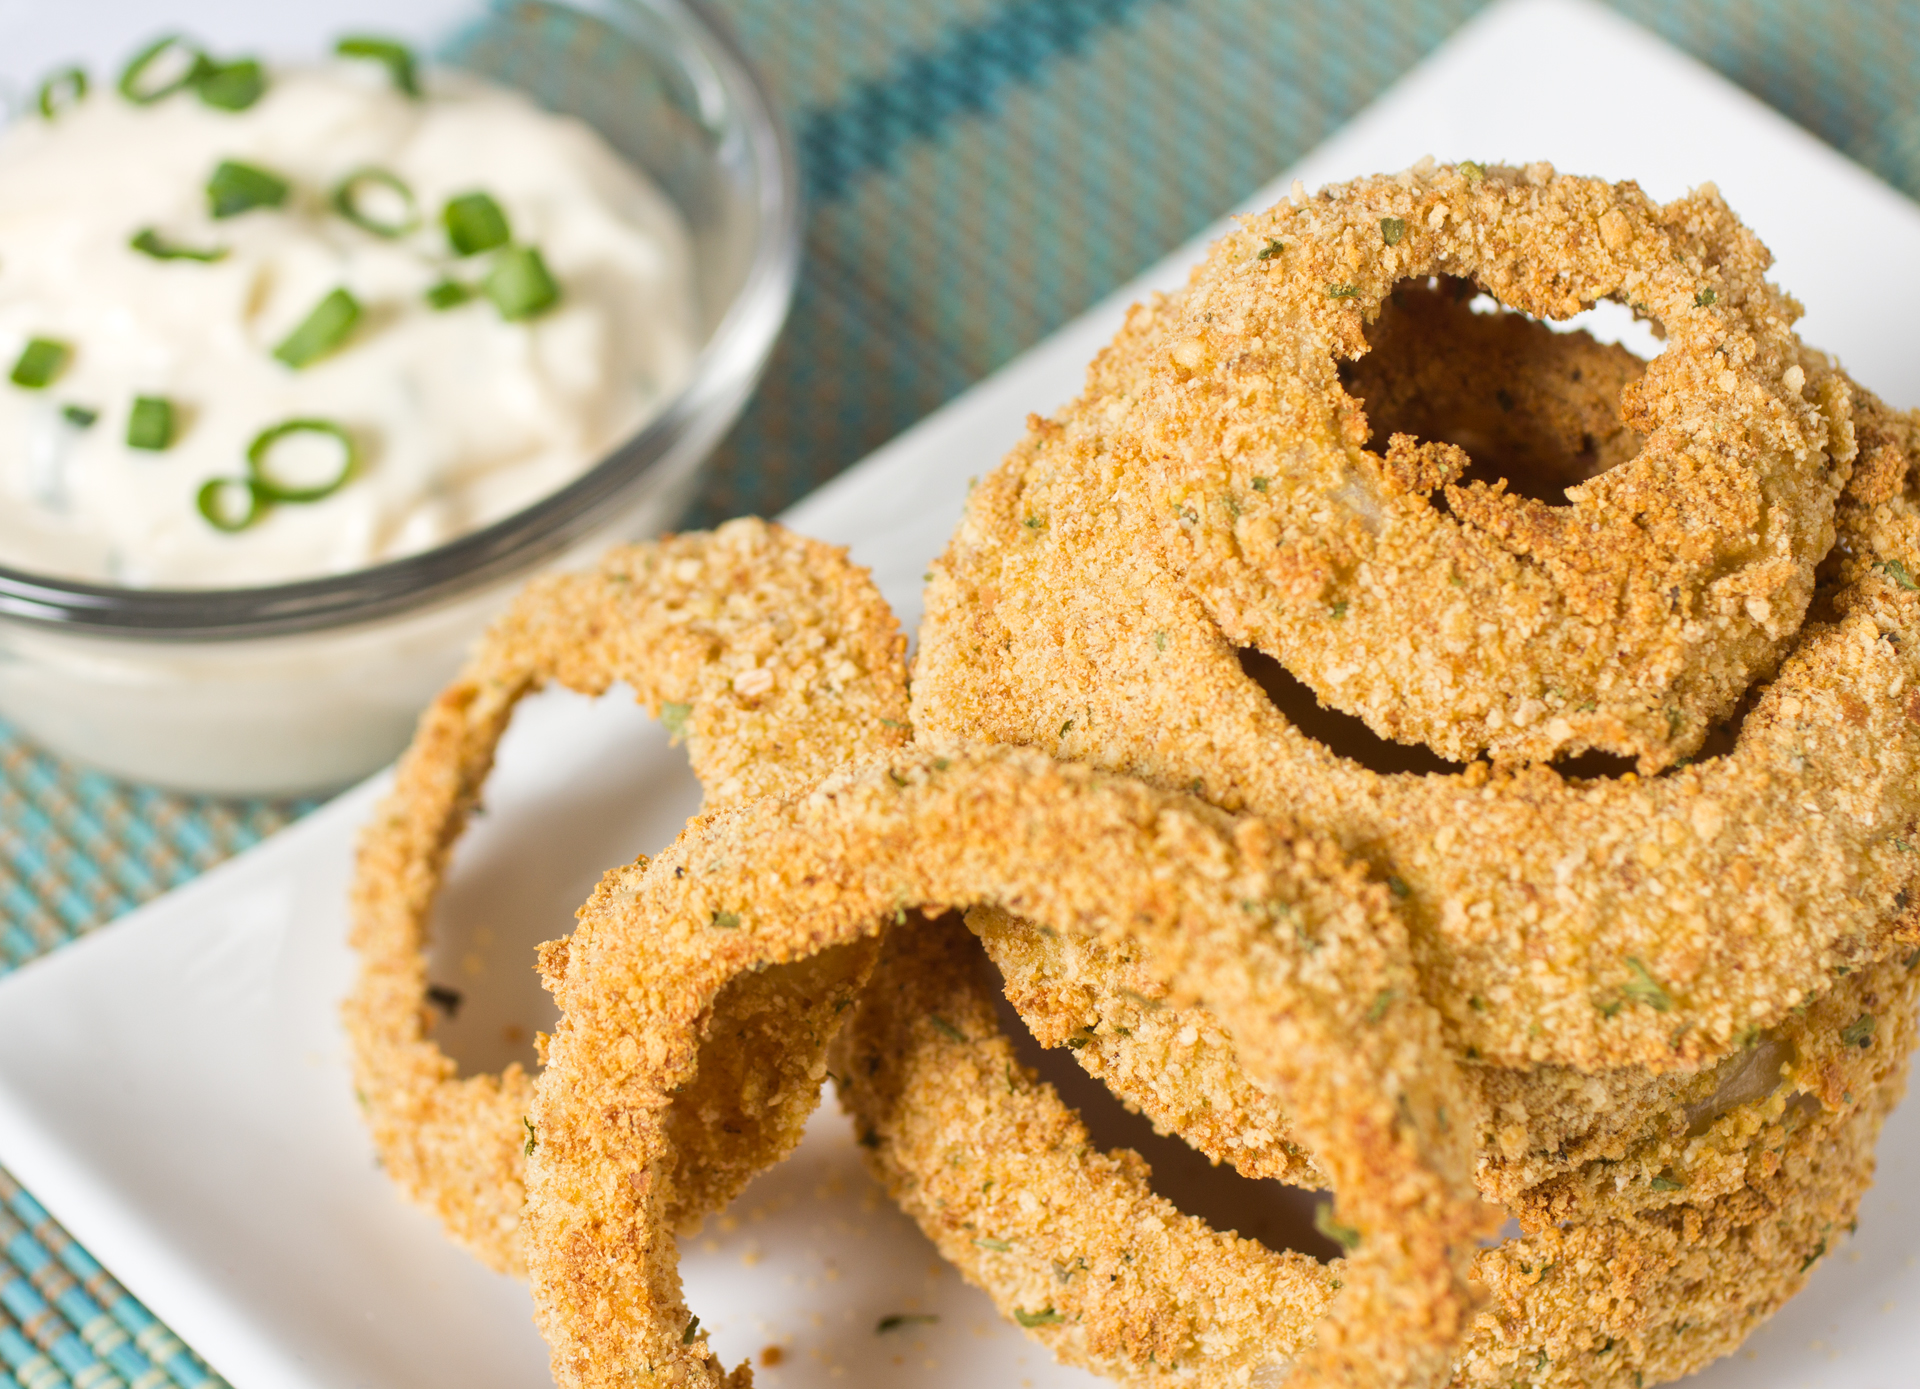 Crispy Baked Onion Rings with Roasted Garlic Dipping Sauce